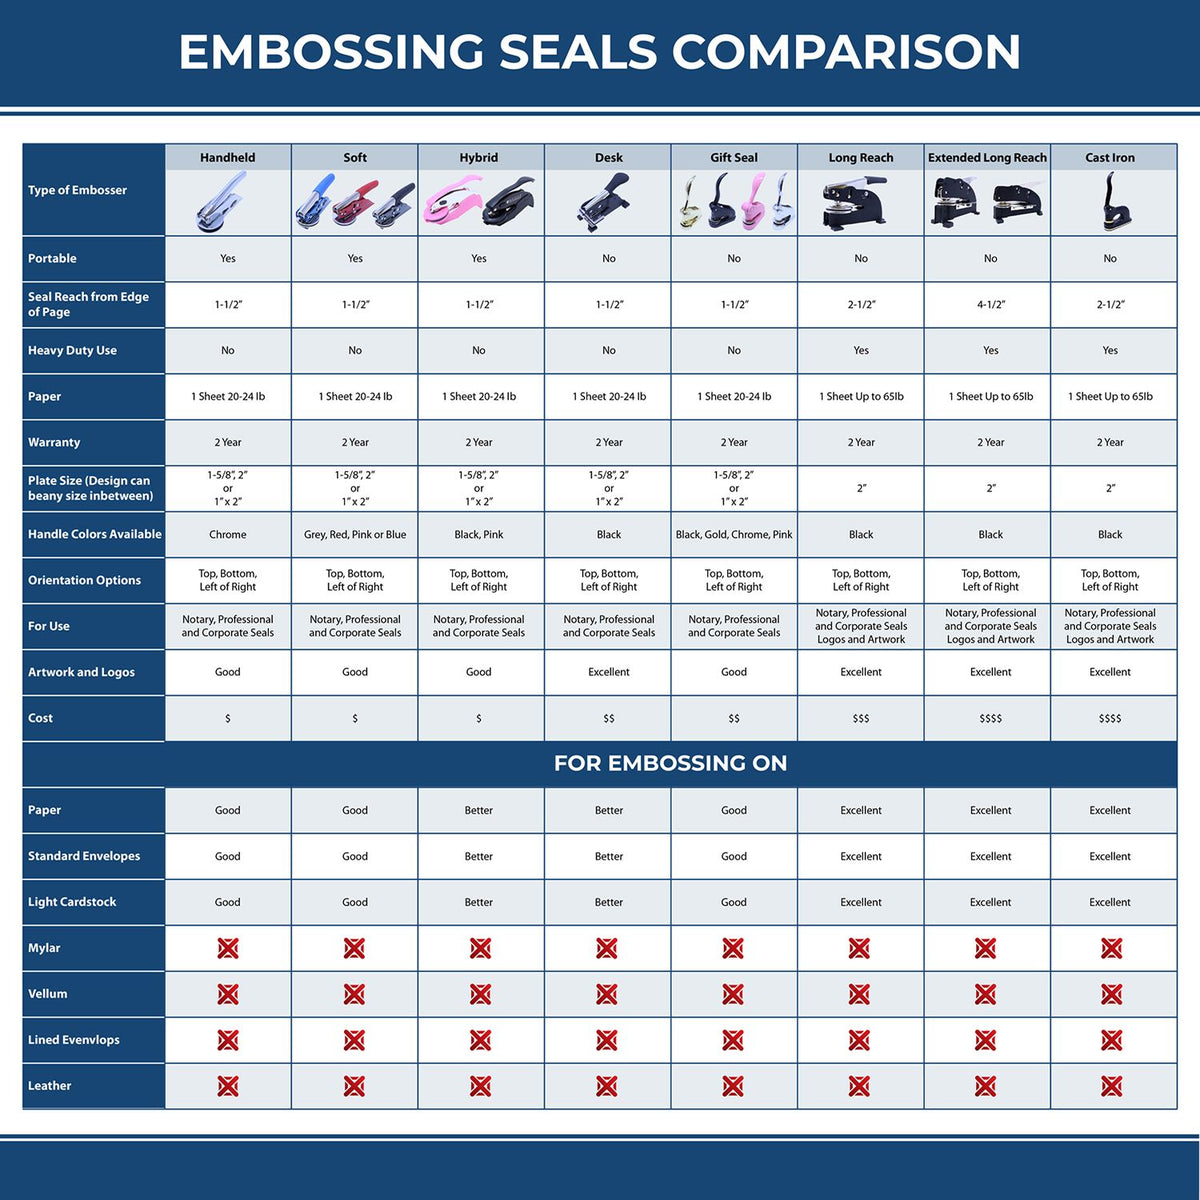 A comparison chart for the different types of mount models available for the Handheld Massachusetts Professional Engineer Embosser.